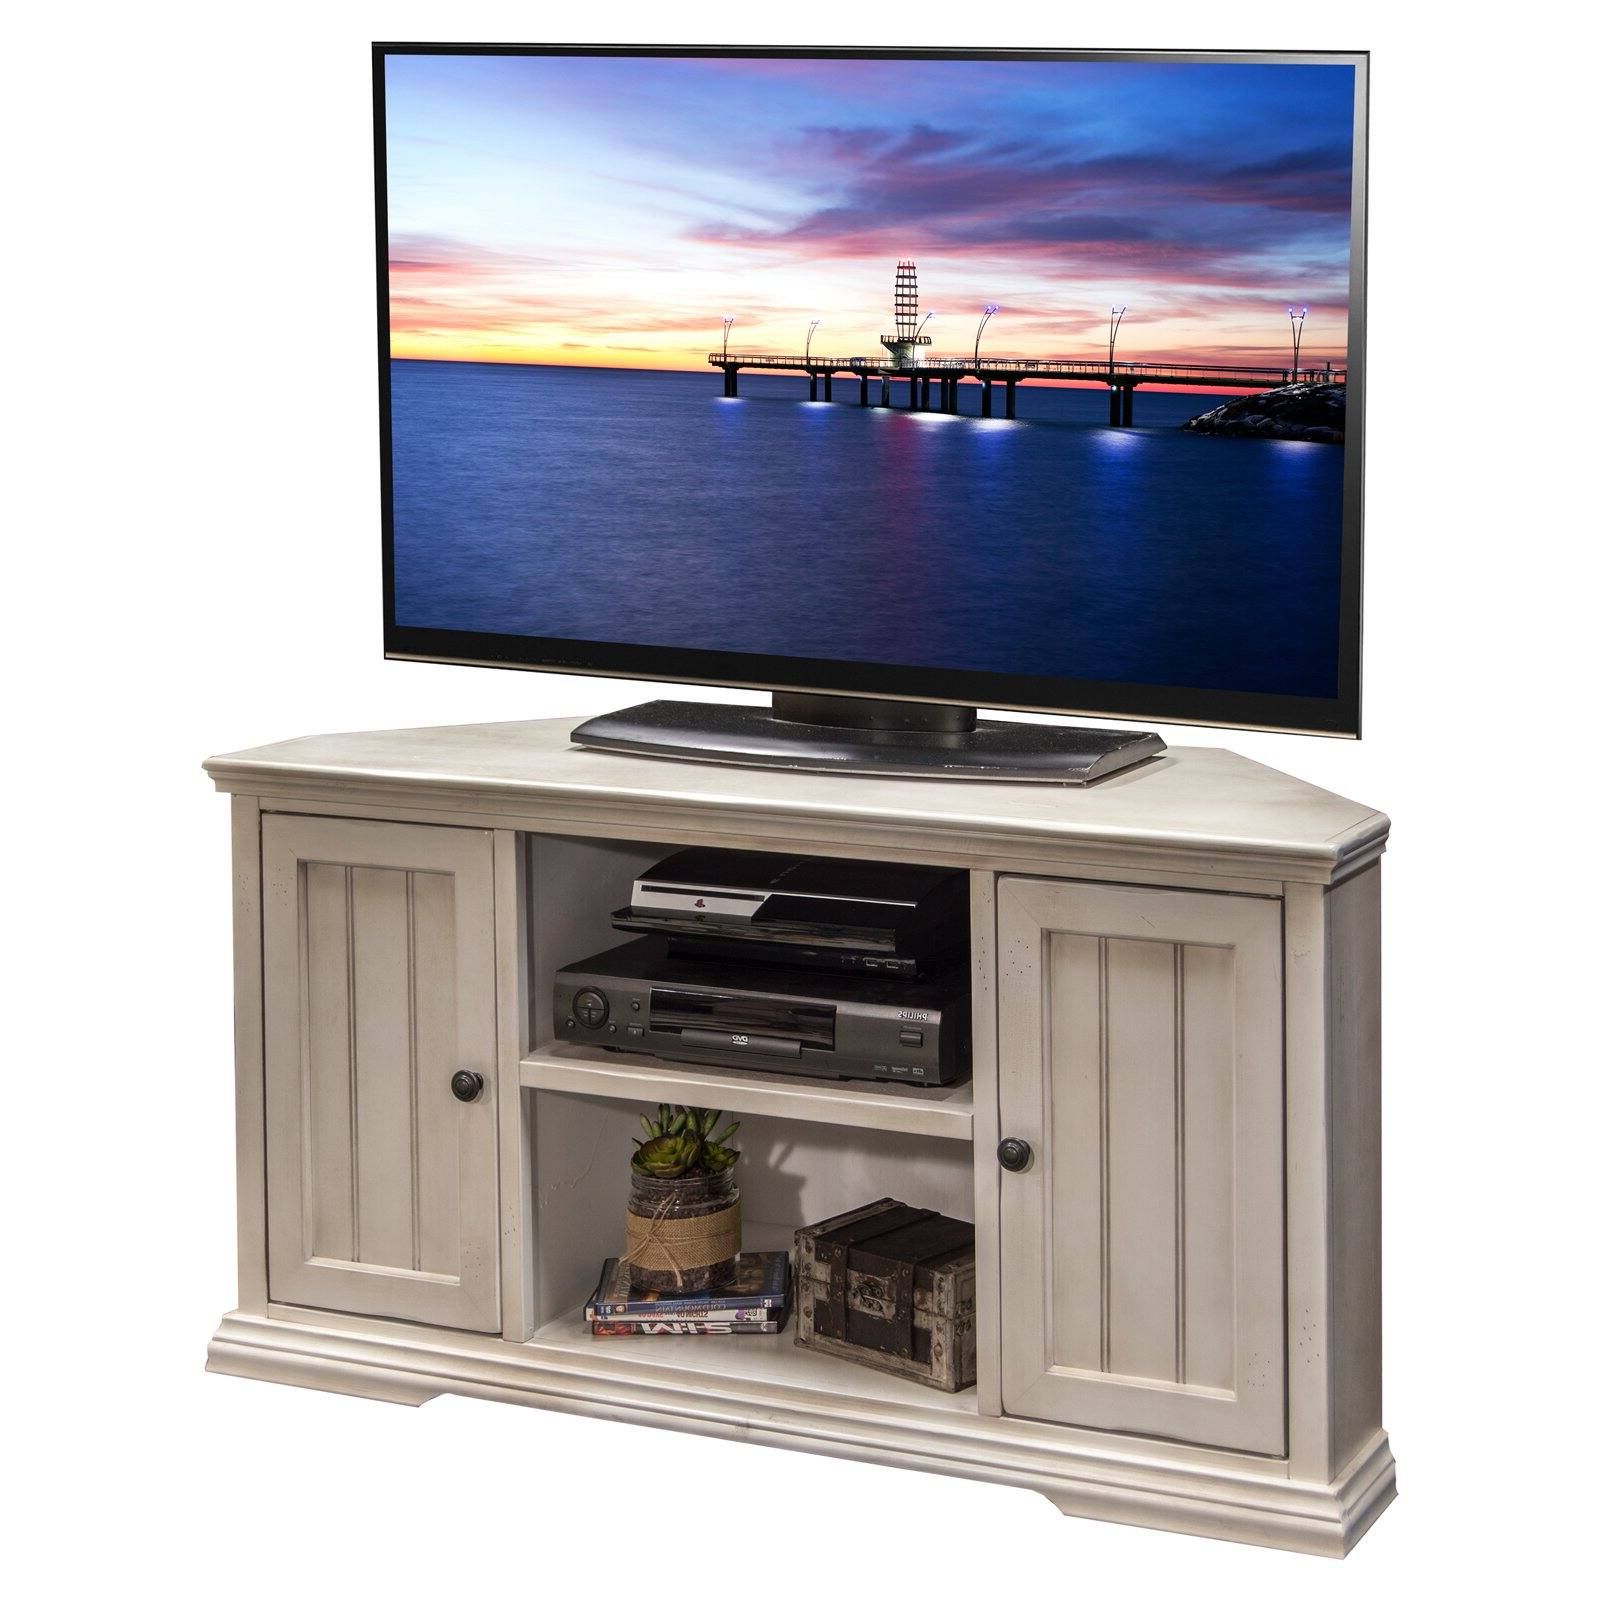 Legends Furniture Riverton 50 In. Tv Stand – Walmart Within Allegra Tv Stands For Tvs Up To 50" (Gallery 16 of 20)